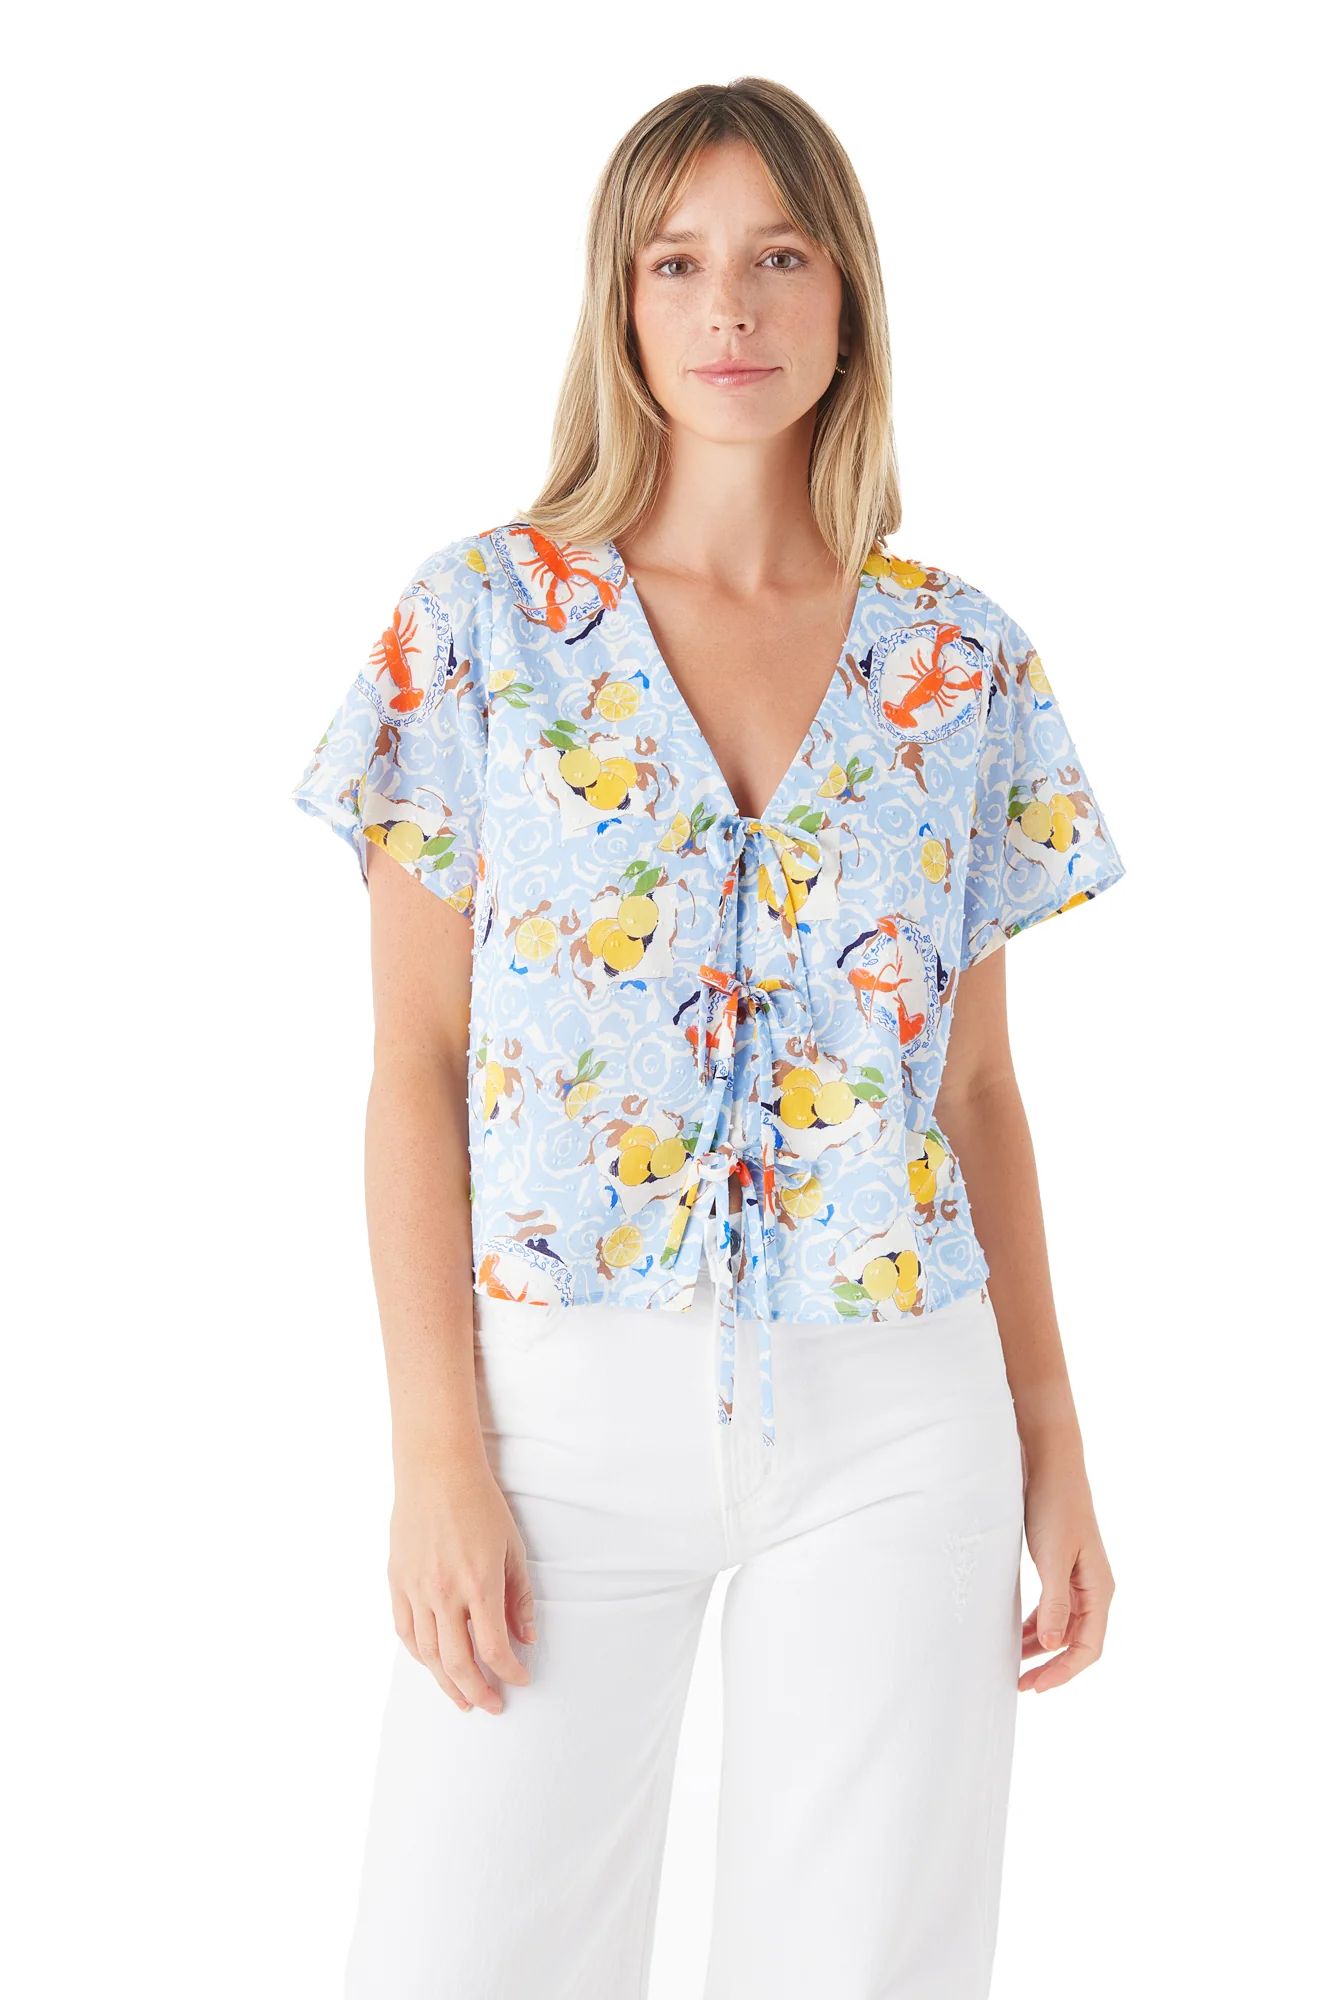 Fallon Top in Summer Table | CROSBY by Mollie Burch | CROSBY by Mollie Burch